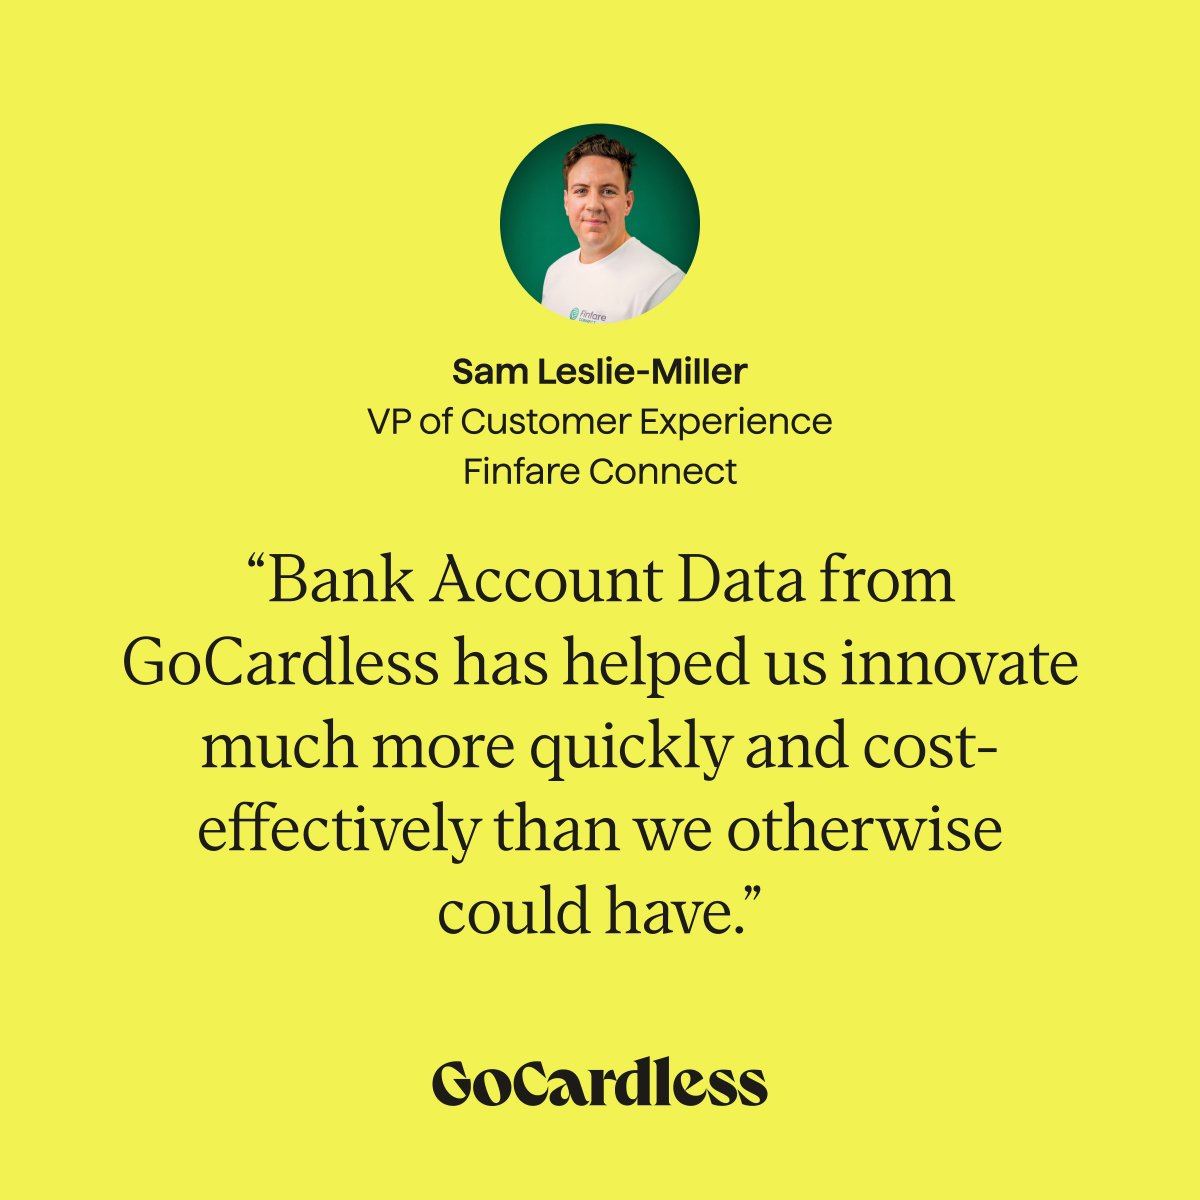 Finfare Connect is a customer loyalty platform that uses open banking powered GoCardless Bank Account Data to drive intelligent rewards and offers, and provide a tailored experience for end users. Read the full story here: gocardless.com/stories/finfar… @FinfareHQ